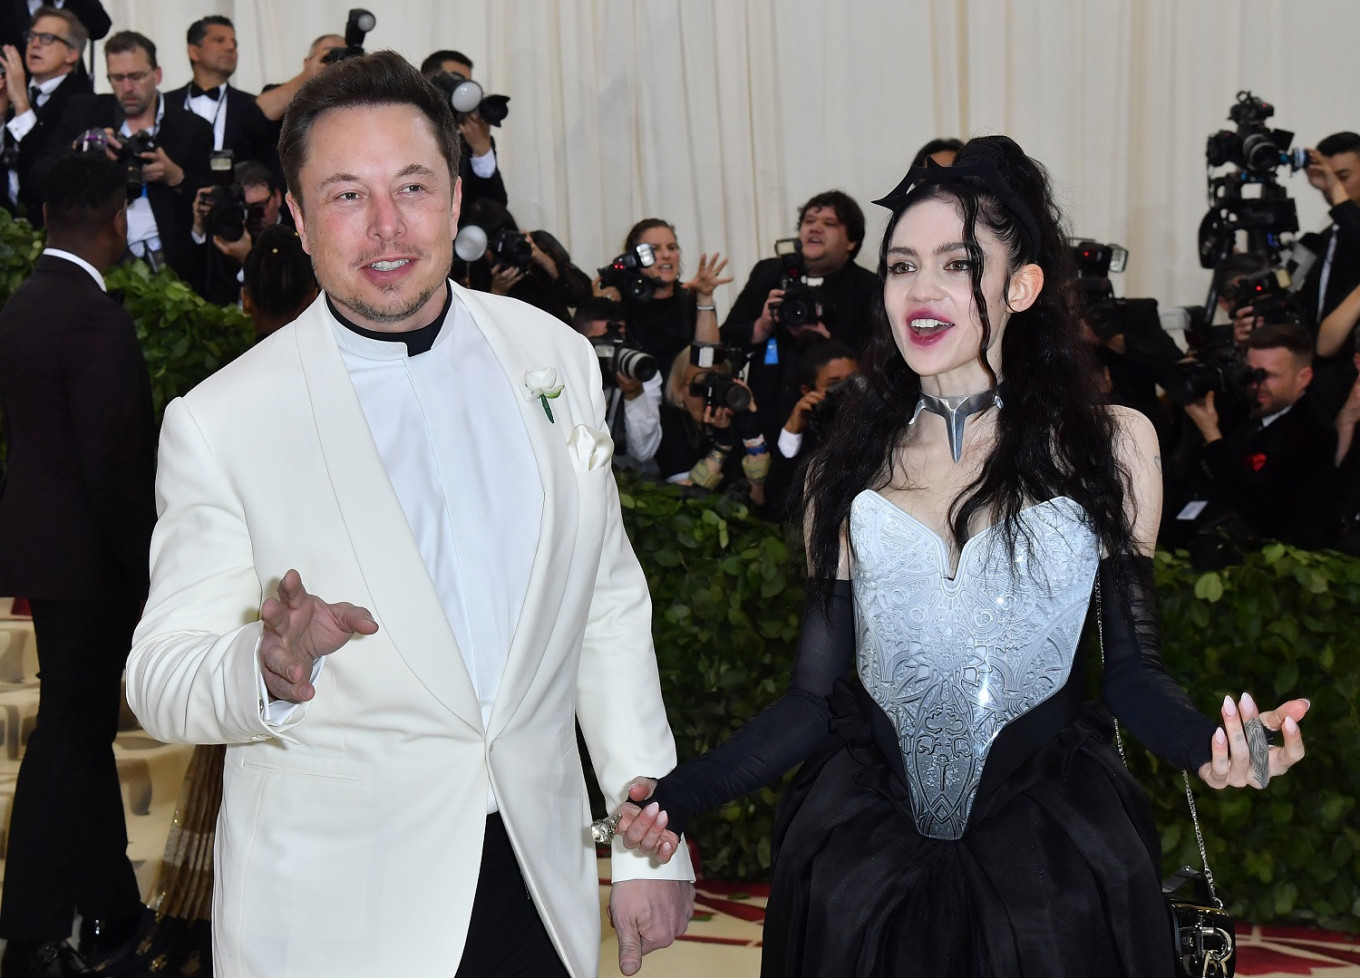 Elon Musk and girlfriend welcome first child together - People - The